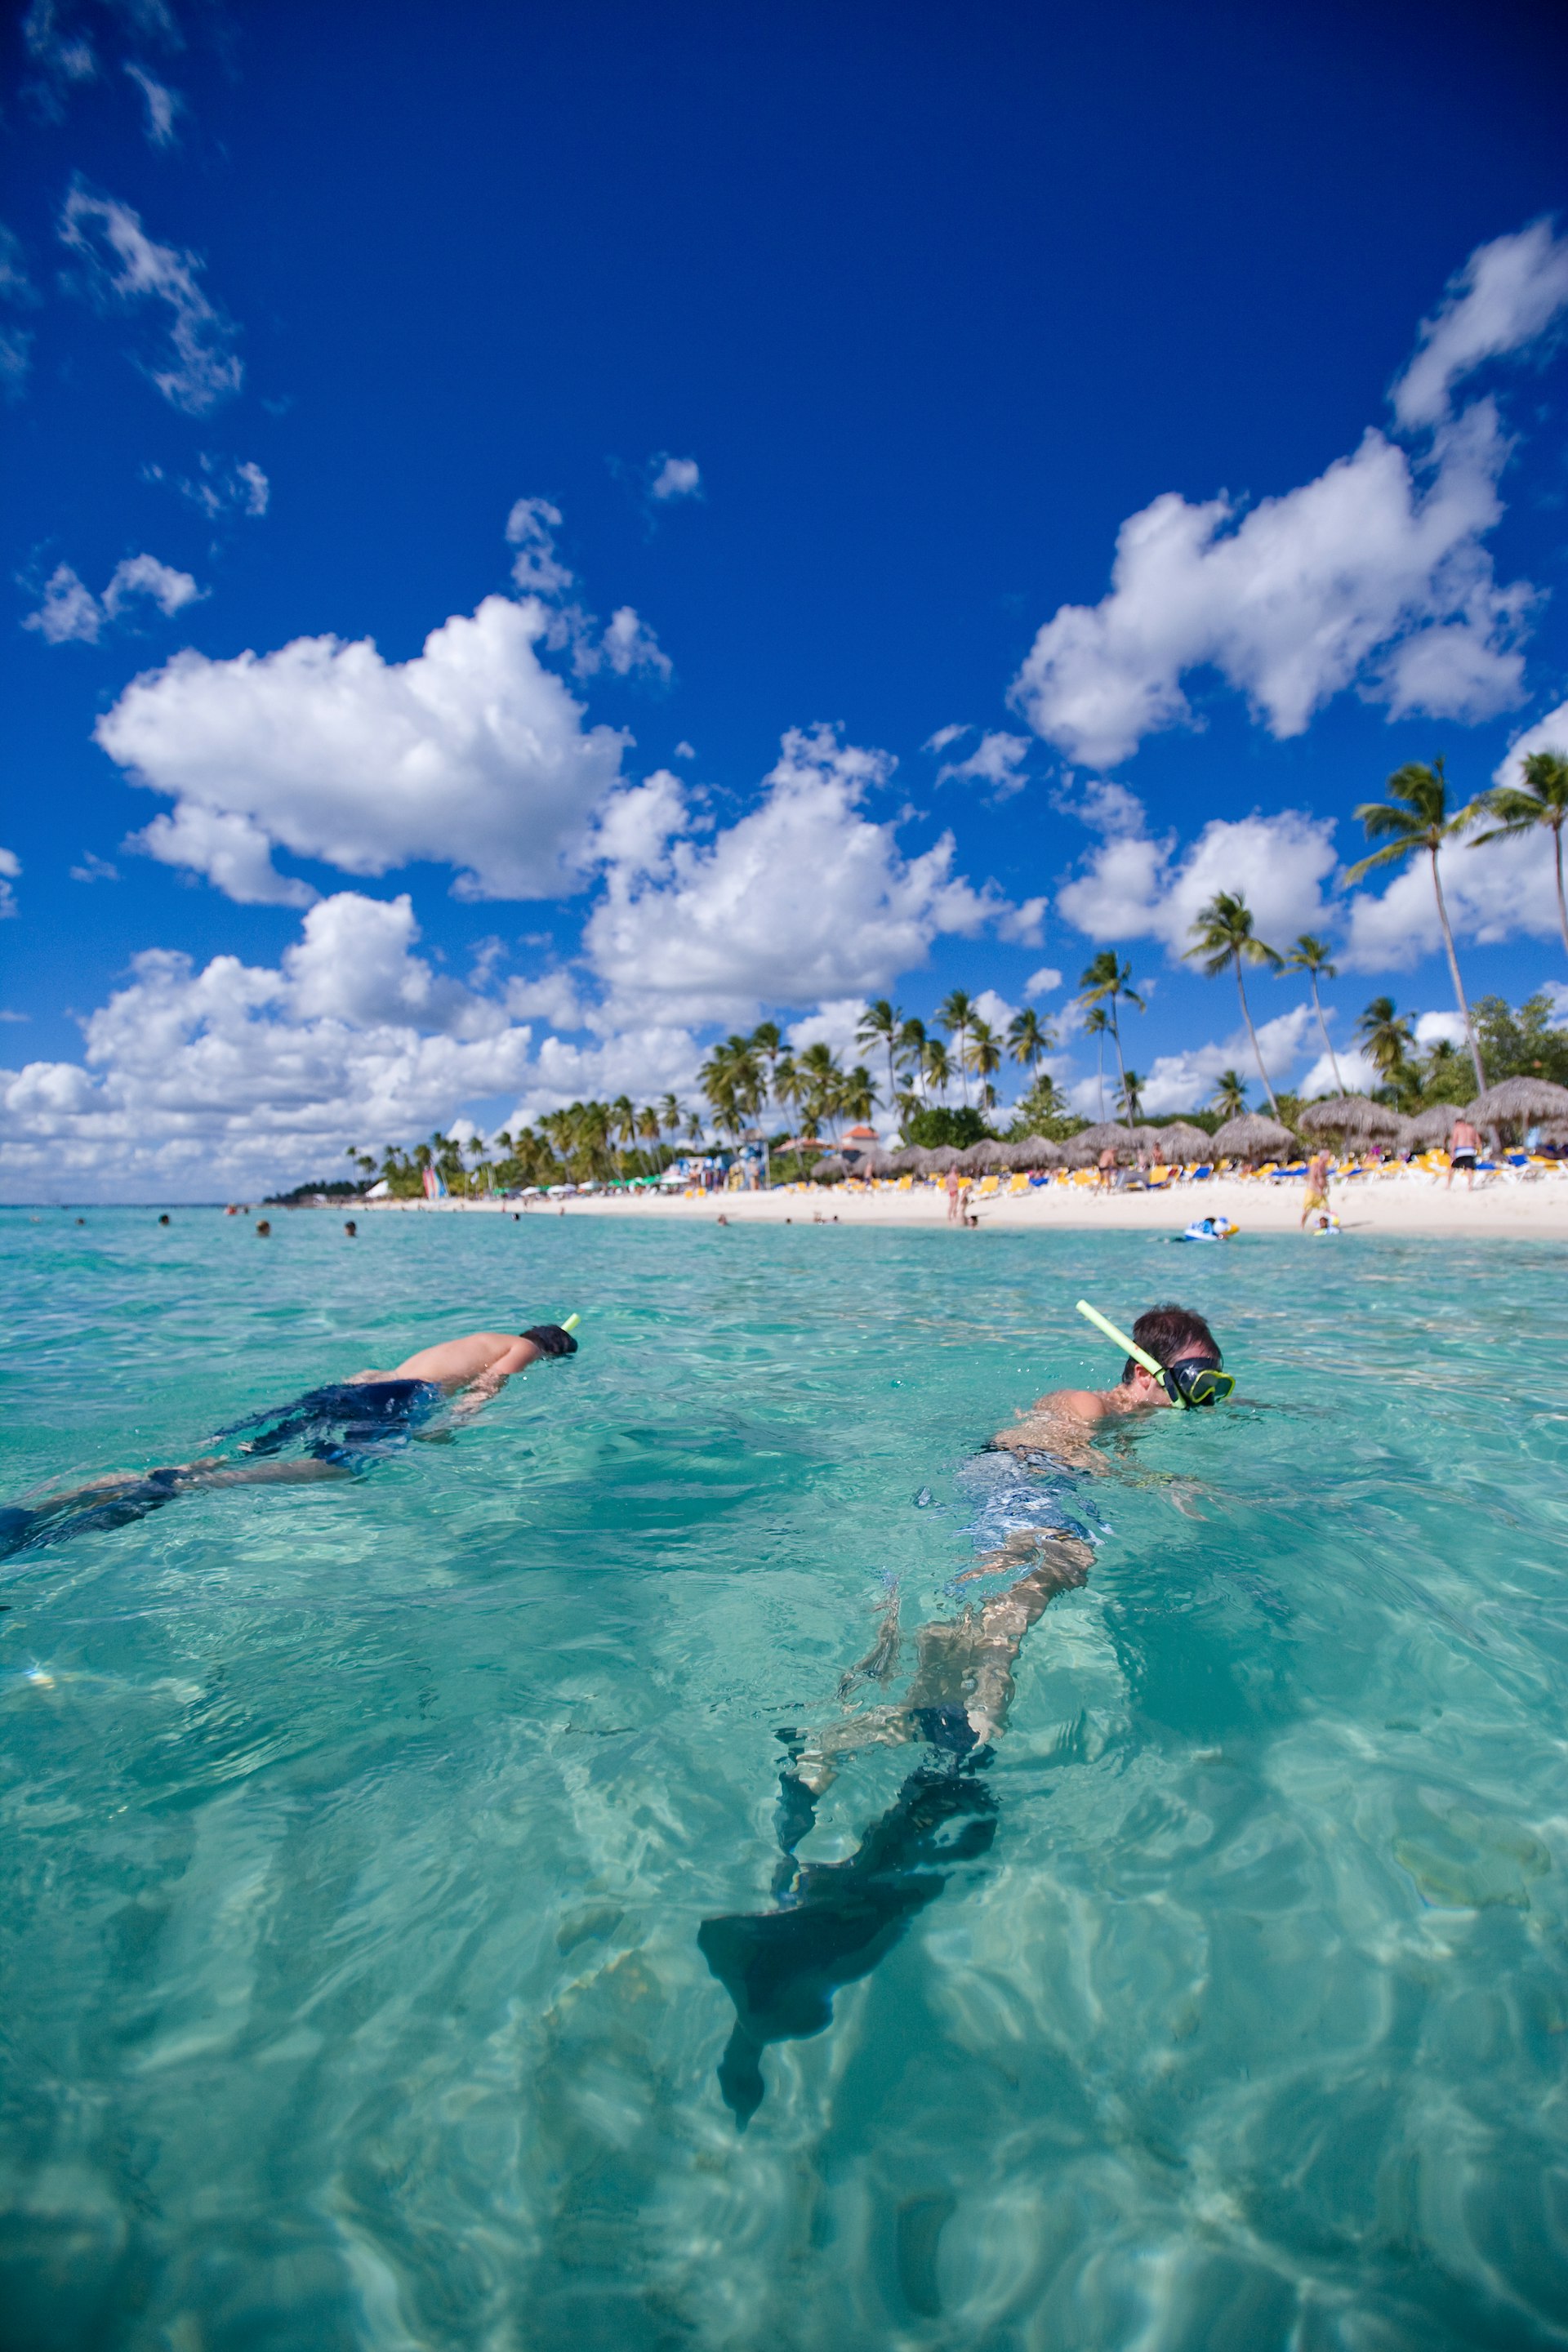 Two men snorkeling off tropical beach, Dominican Republic